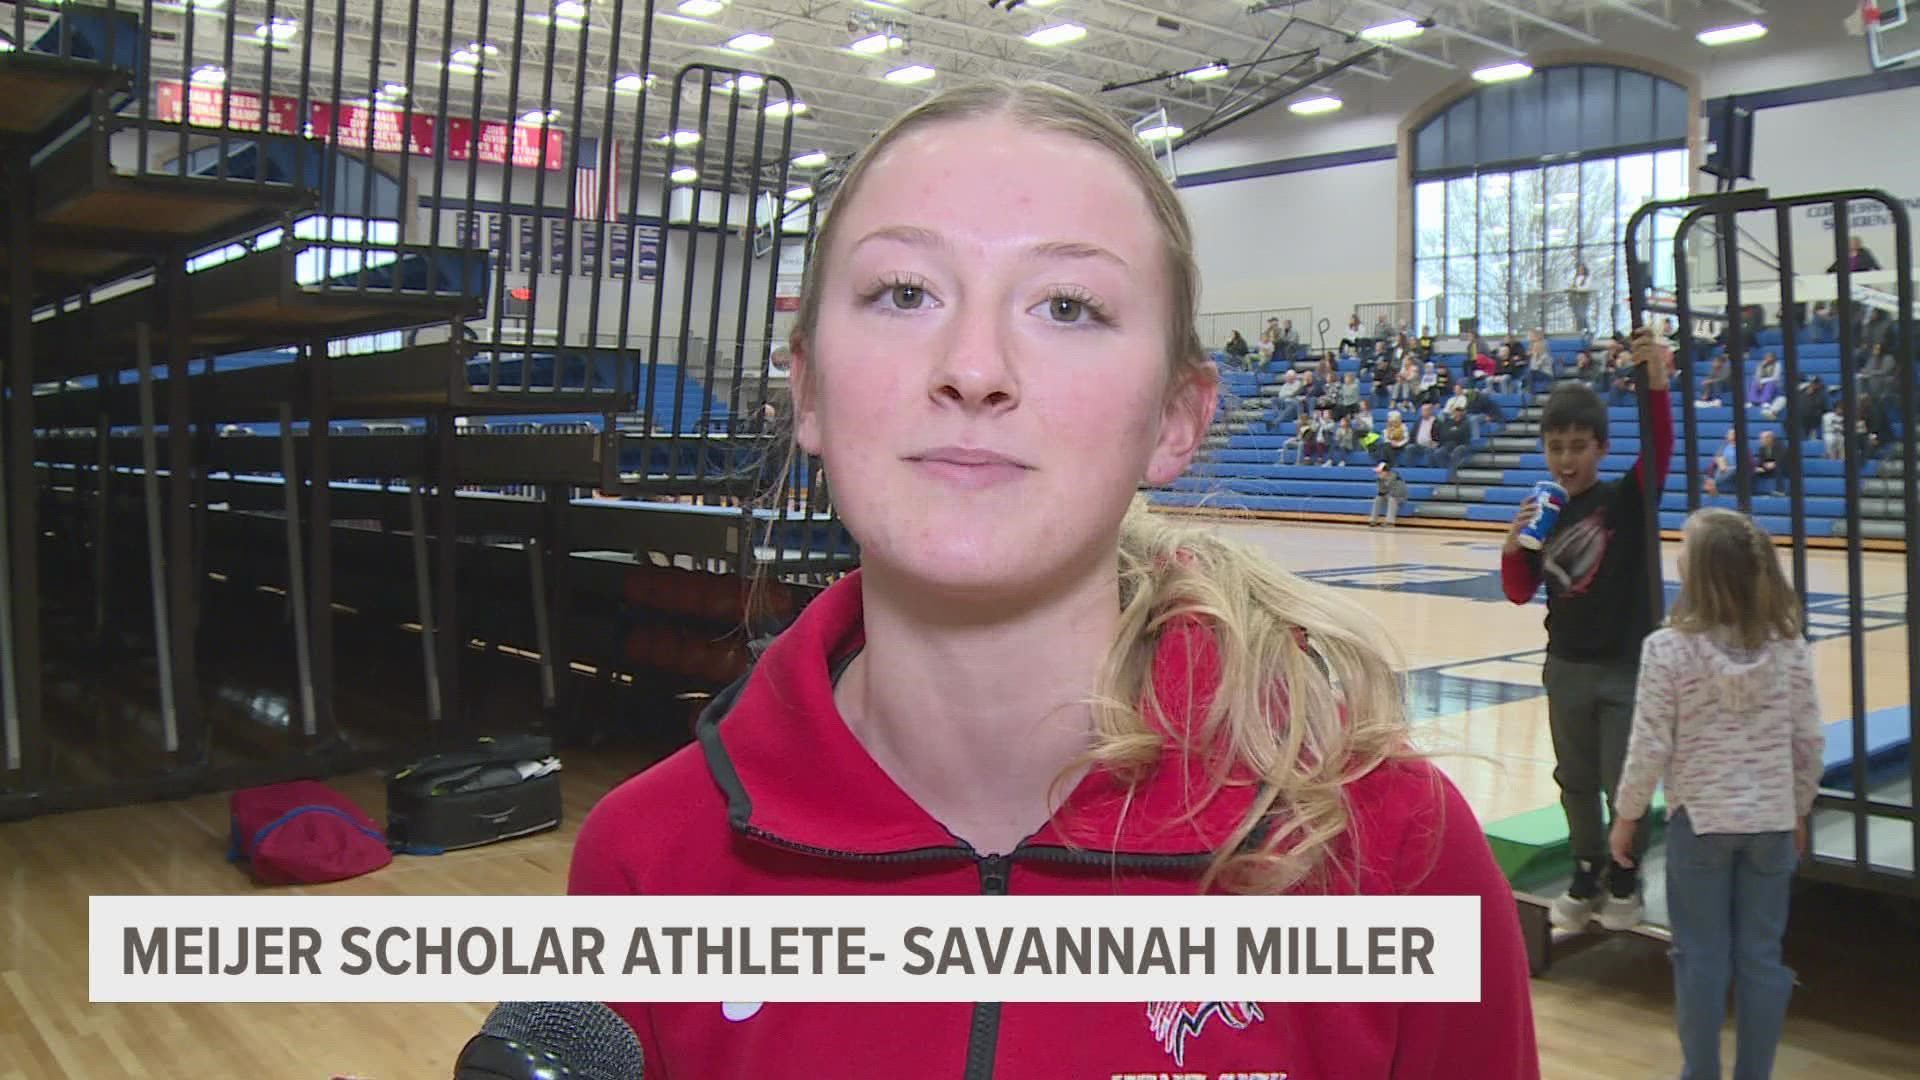 Even with all her extra-curricular activities, Miller is able to maintain a 4.0 GPA and is ranked second in her senior class.